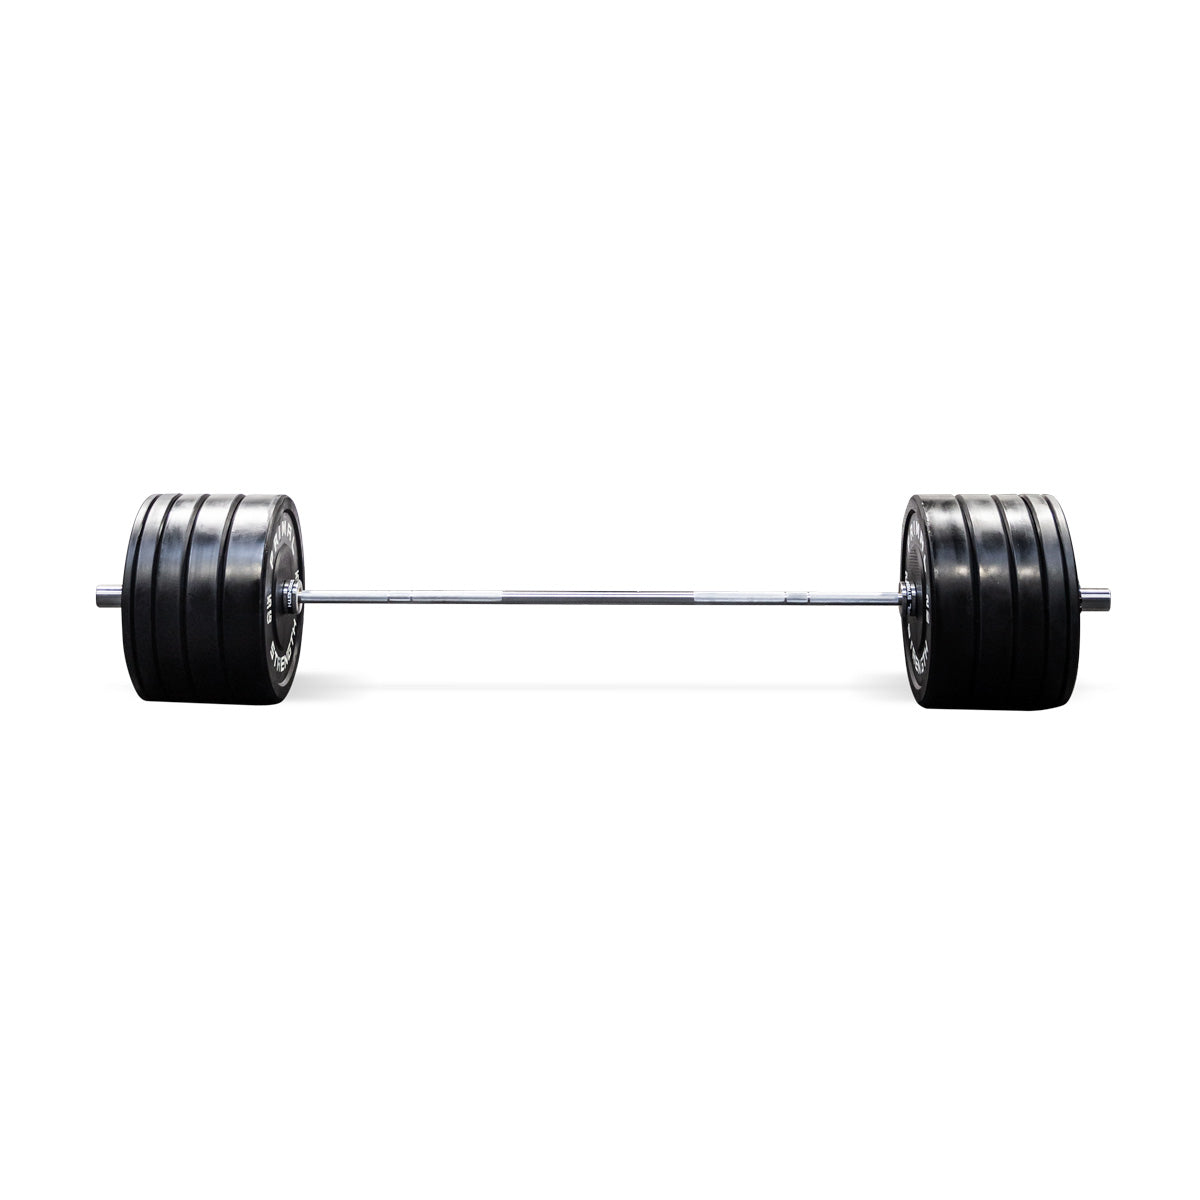 a black olympic barbell loaded with 170kg of bumper plates